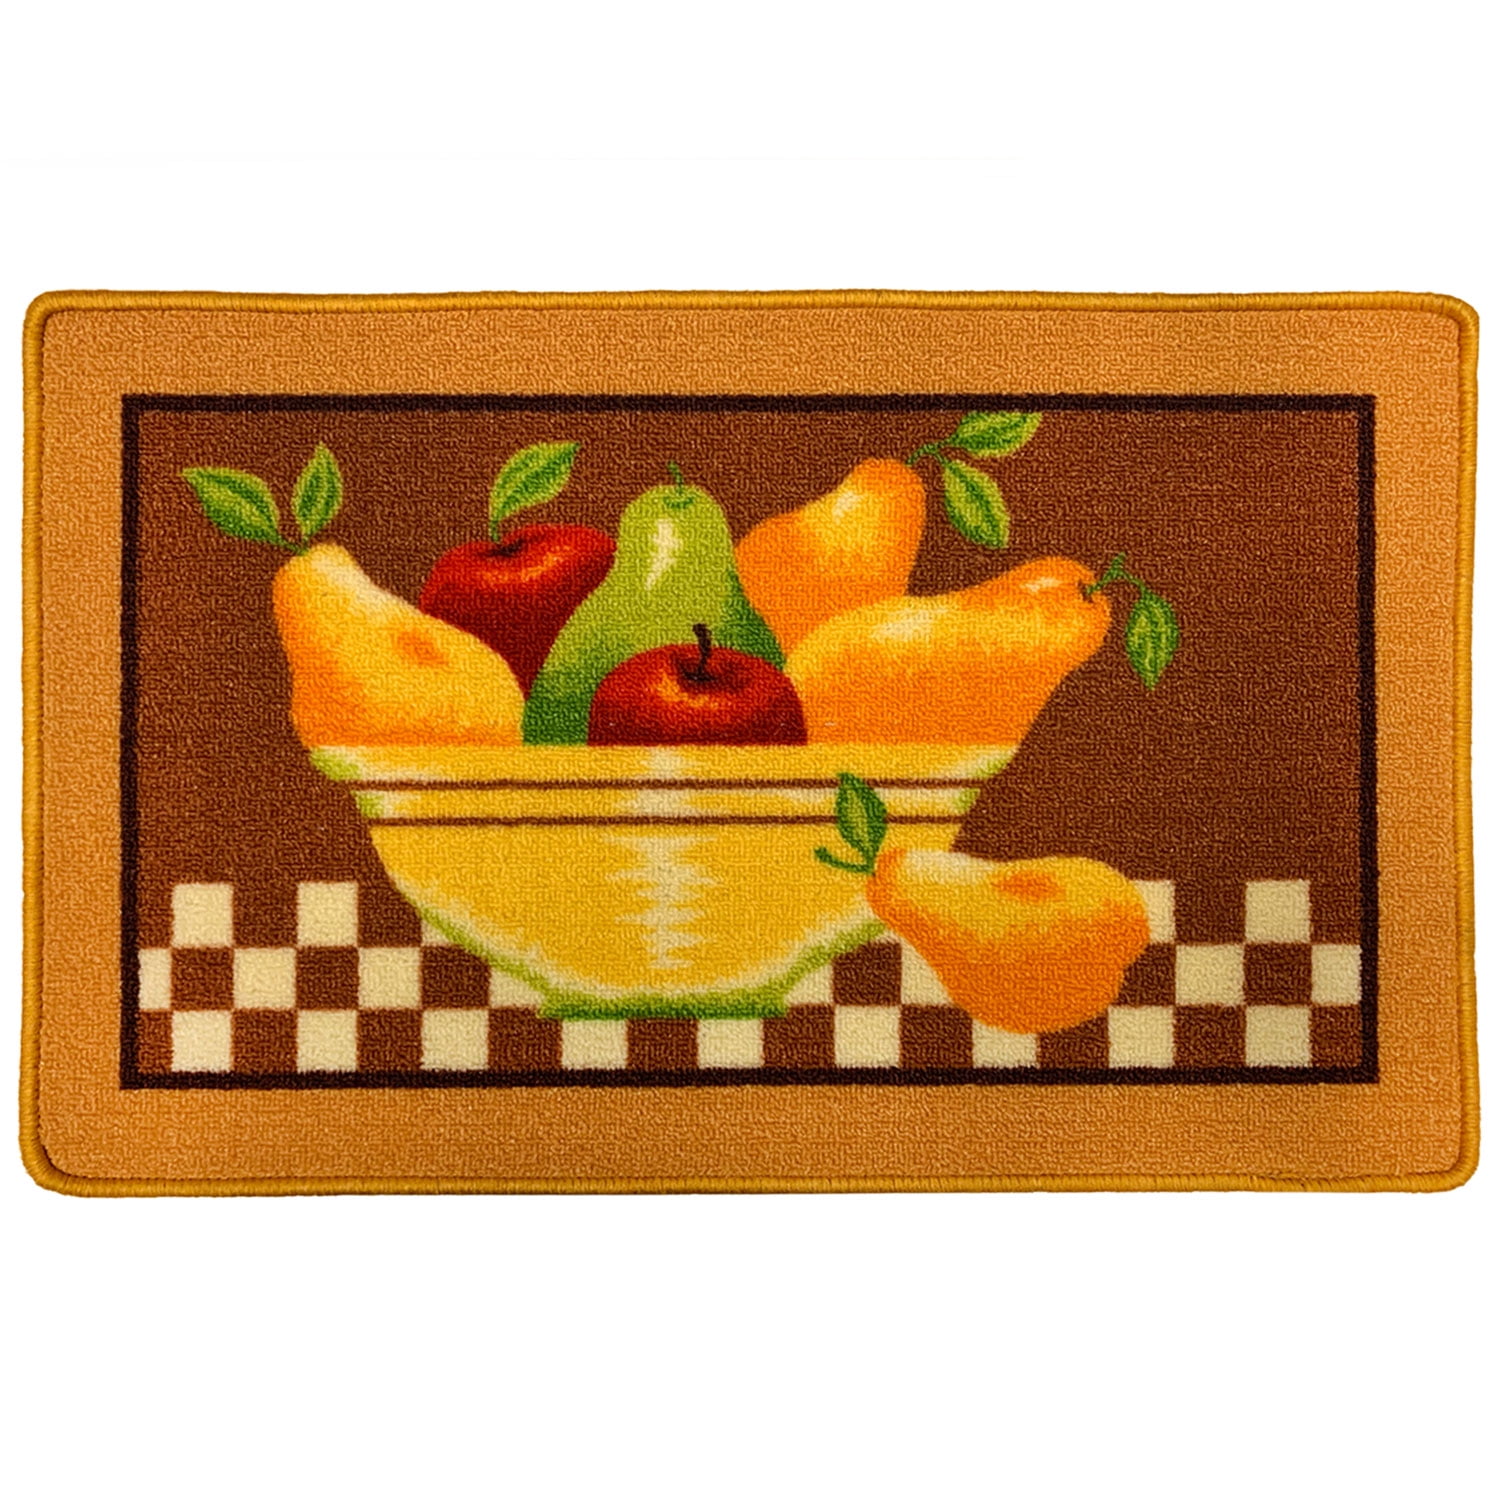 PRINTED KITCHEN RUG 18"x 30" 7 FRUITS IN GREEN & YELLOW FRAME  D Shaped RT 